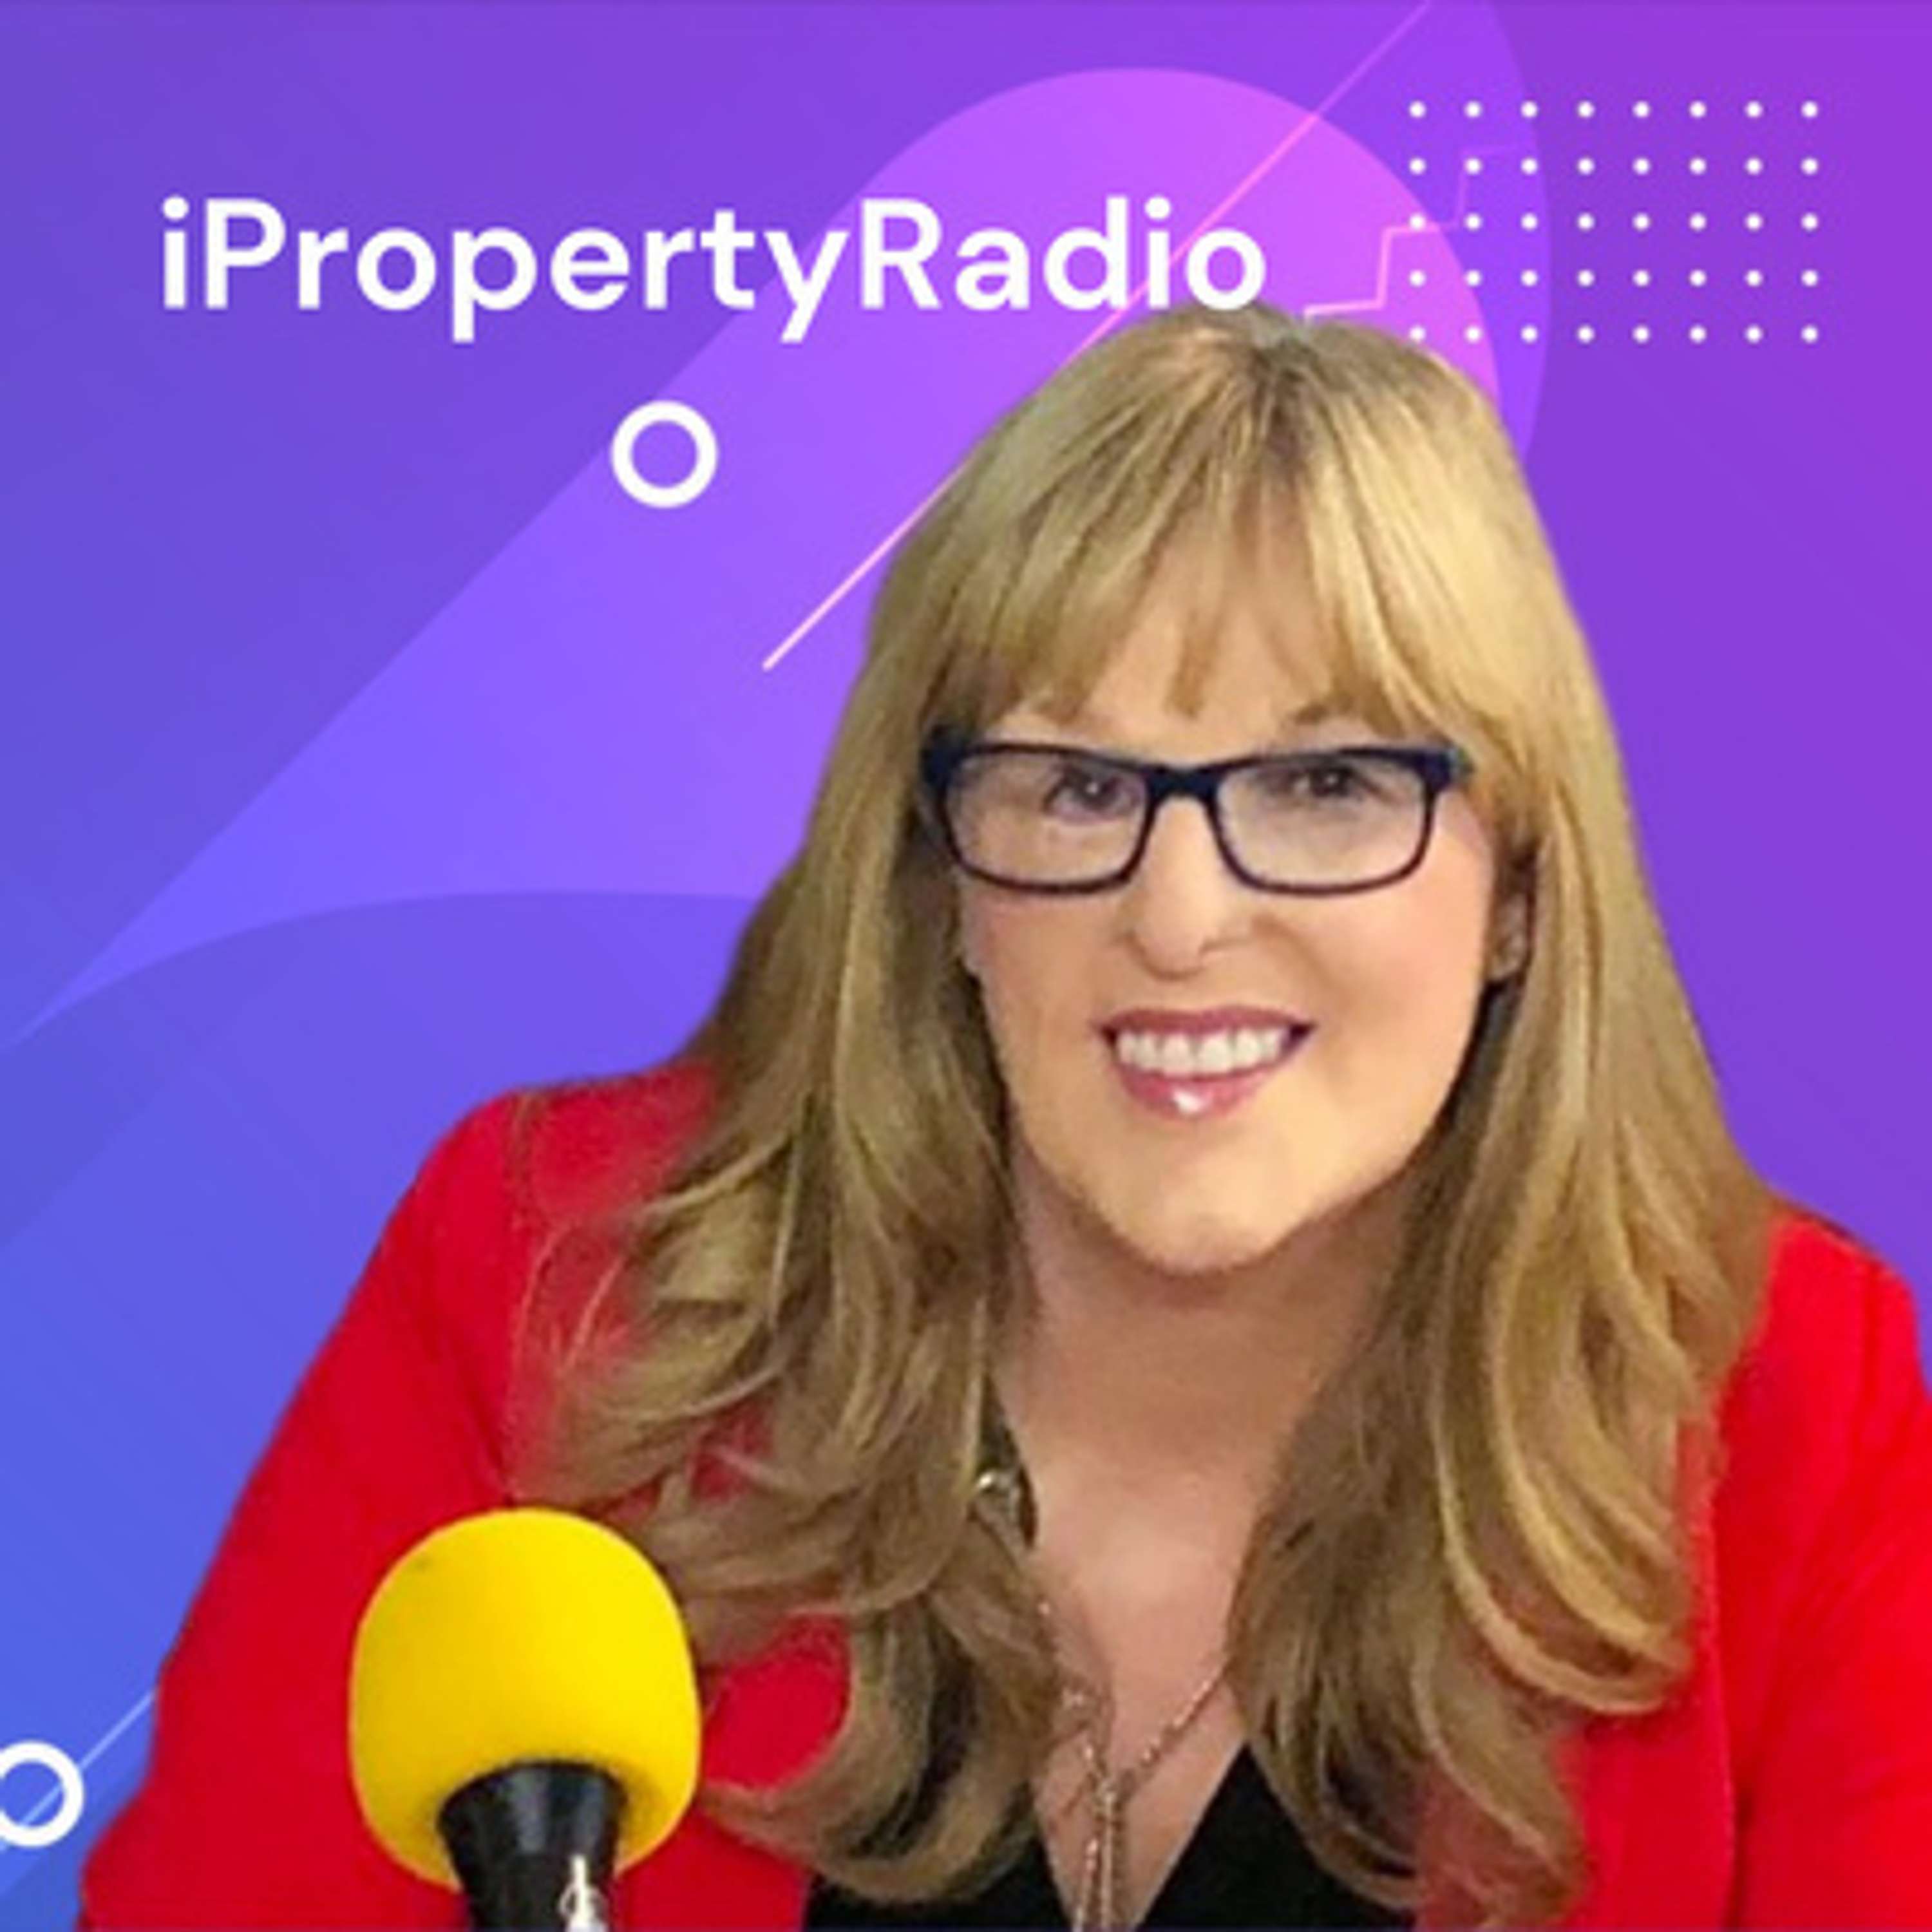 Ep.53 Property Matters: February 25th, 2020 - Waterford special | The business of property management | Proptech for estate agents